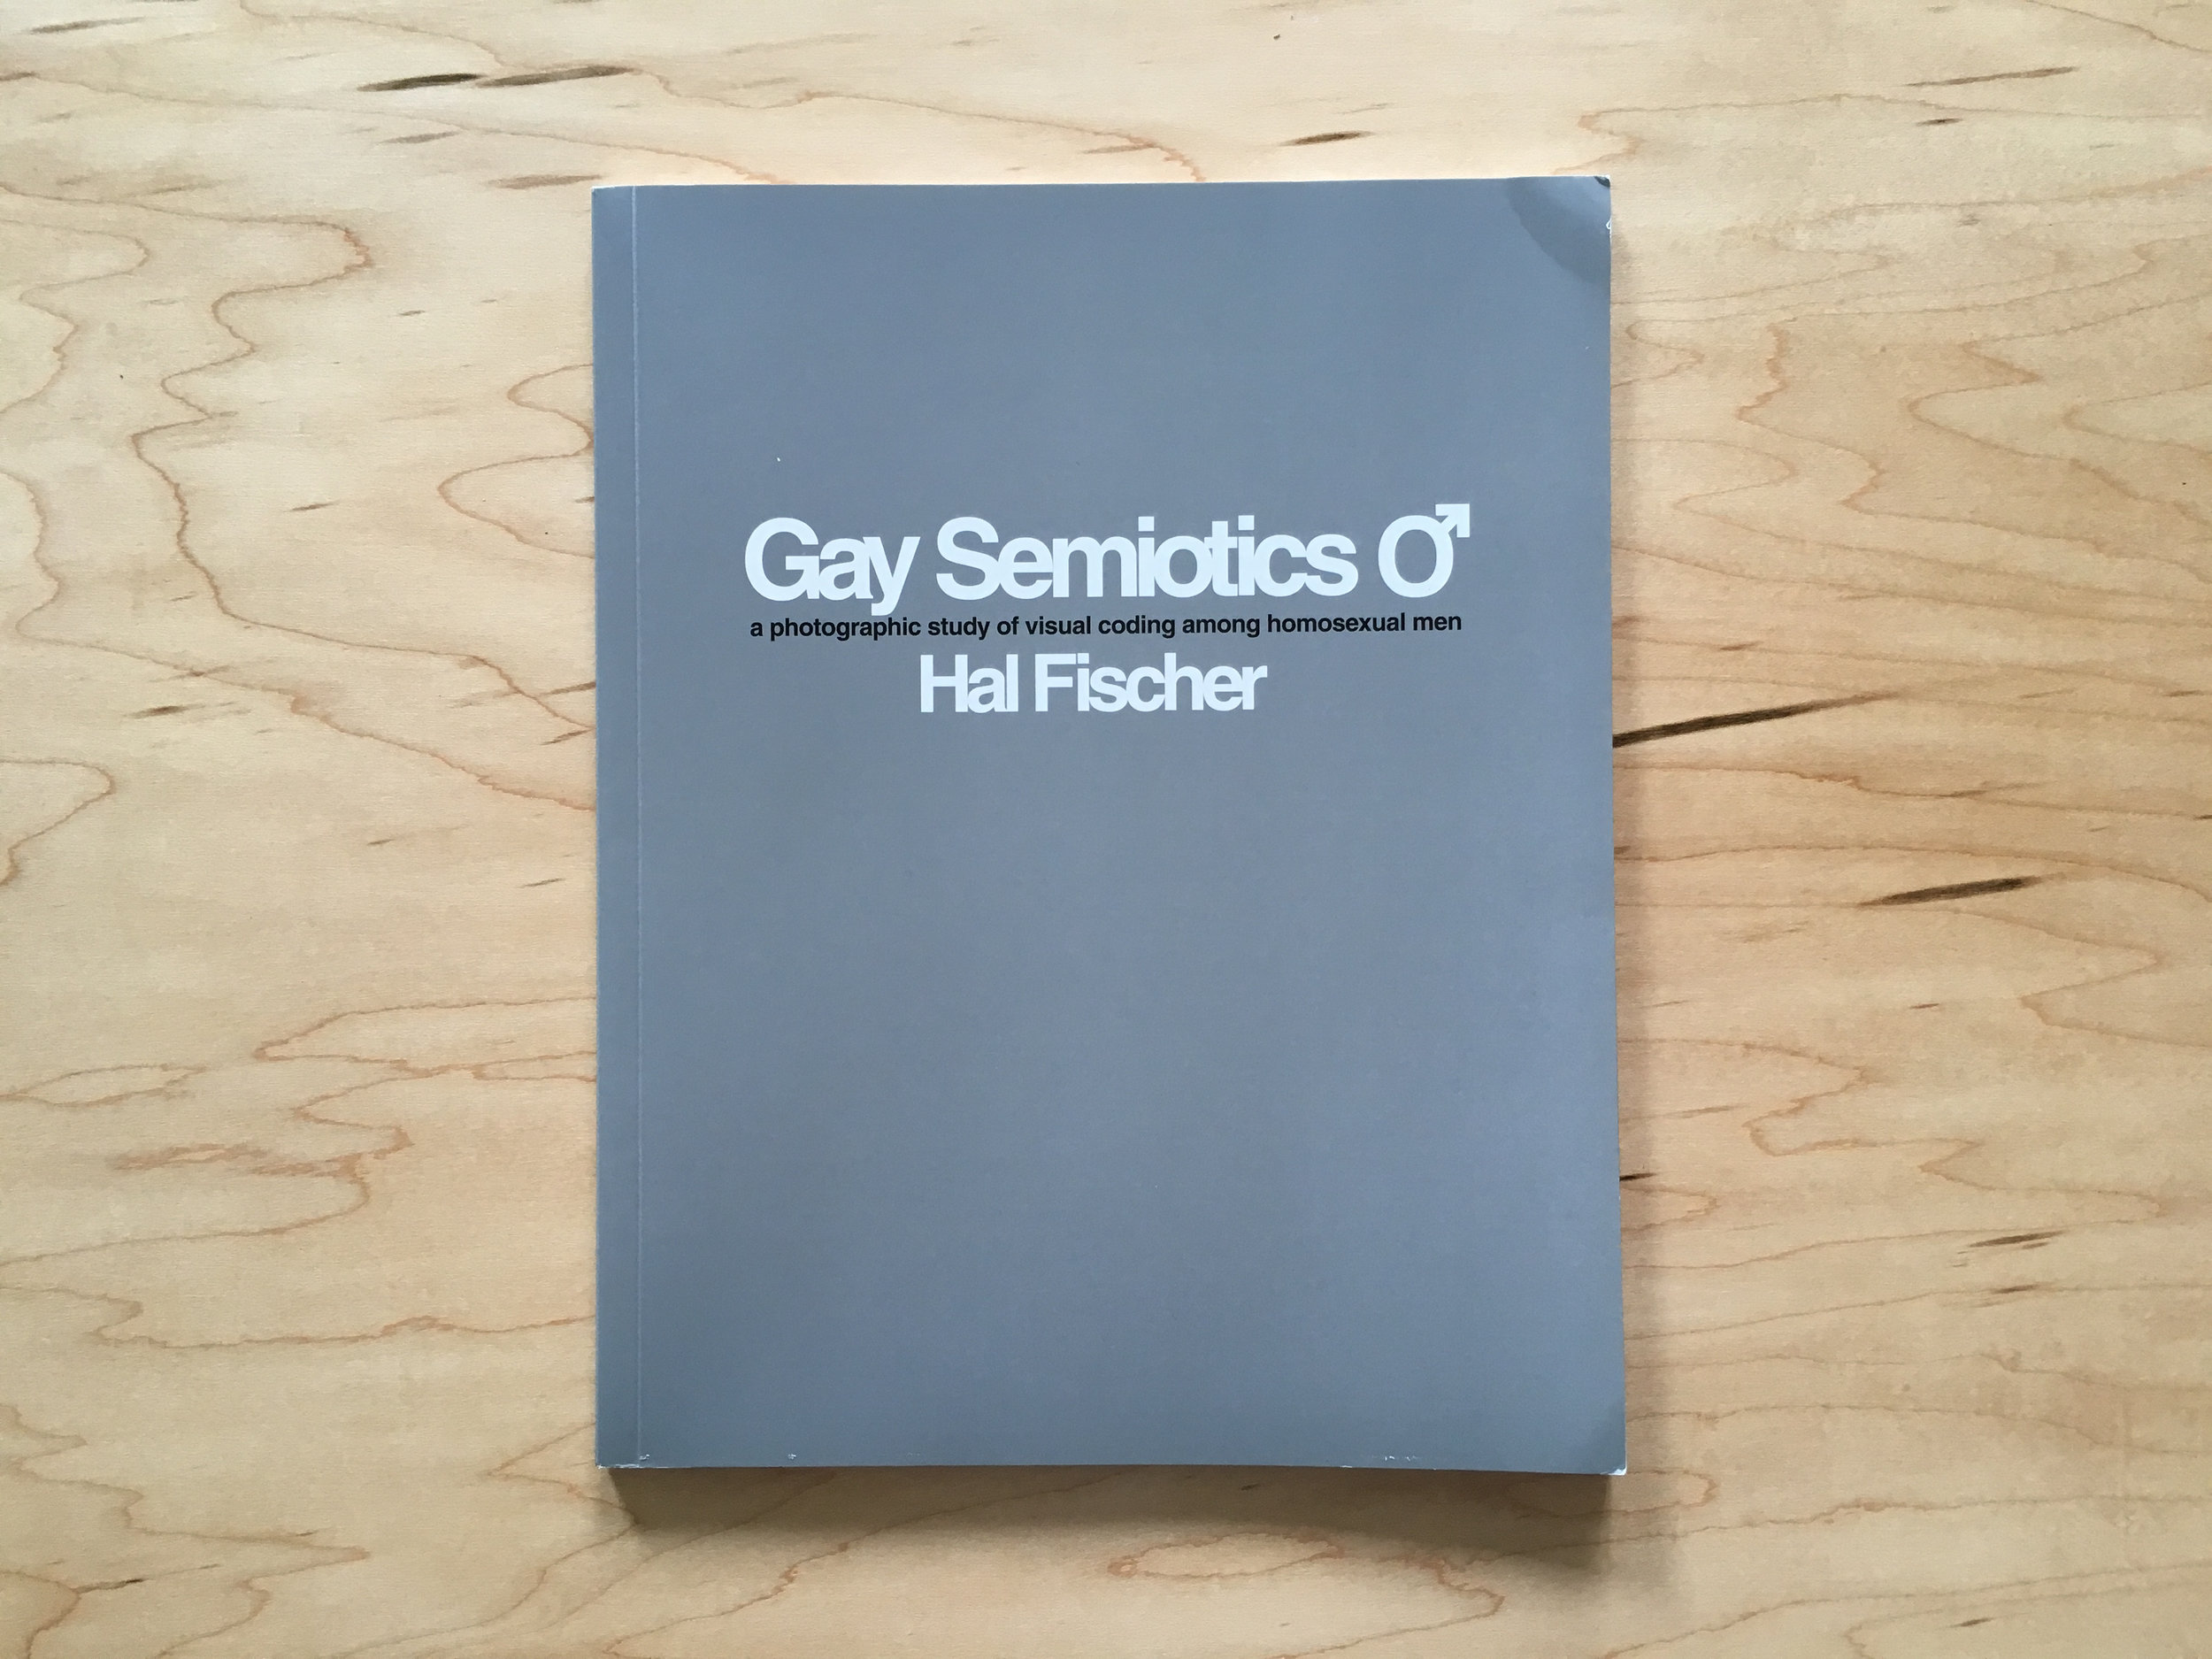  Cover: Hal Fischer,  Gay Semiotics: A Photographic Study of Visual Coding Among Homosexual Men  (Los Angeles: Cherry and Martin, 2015). 